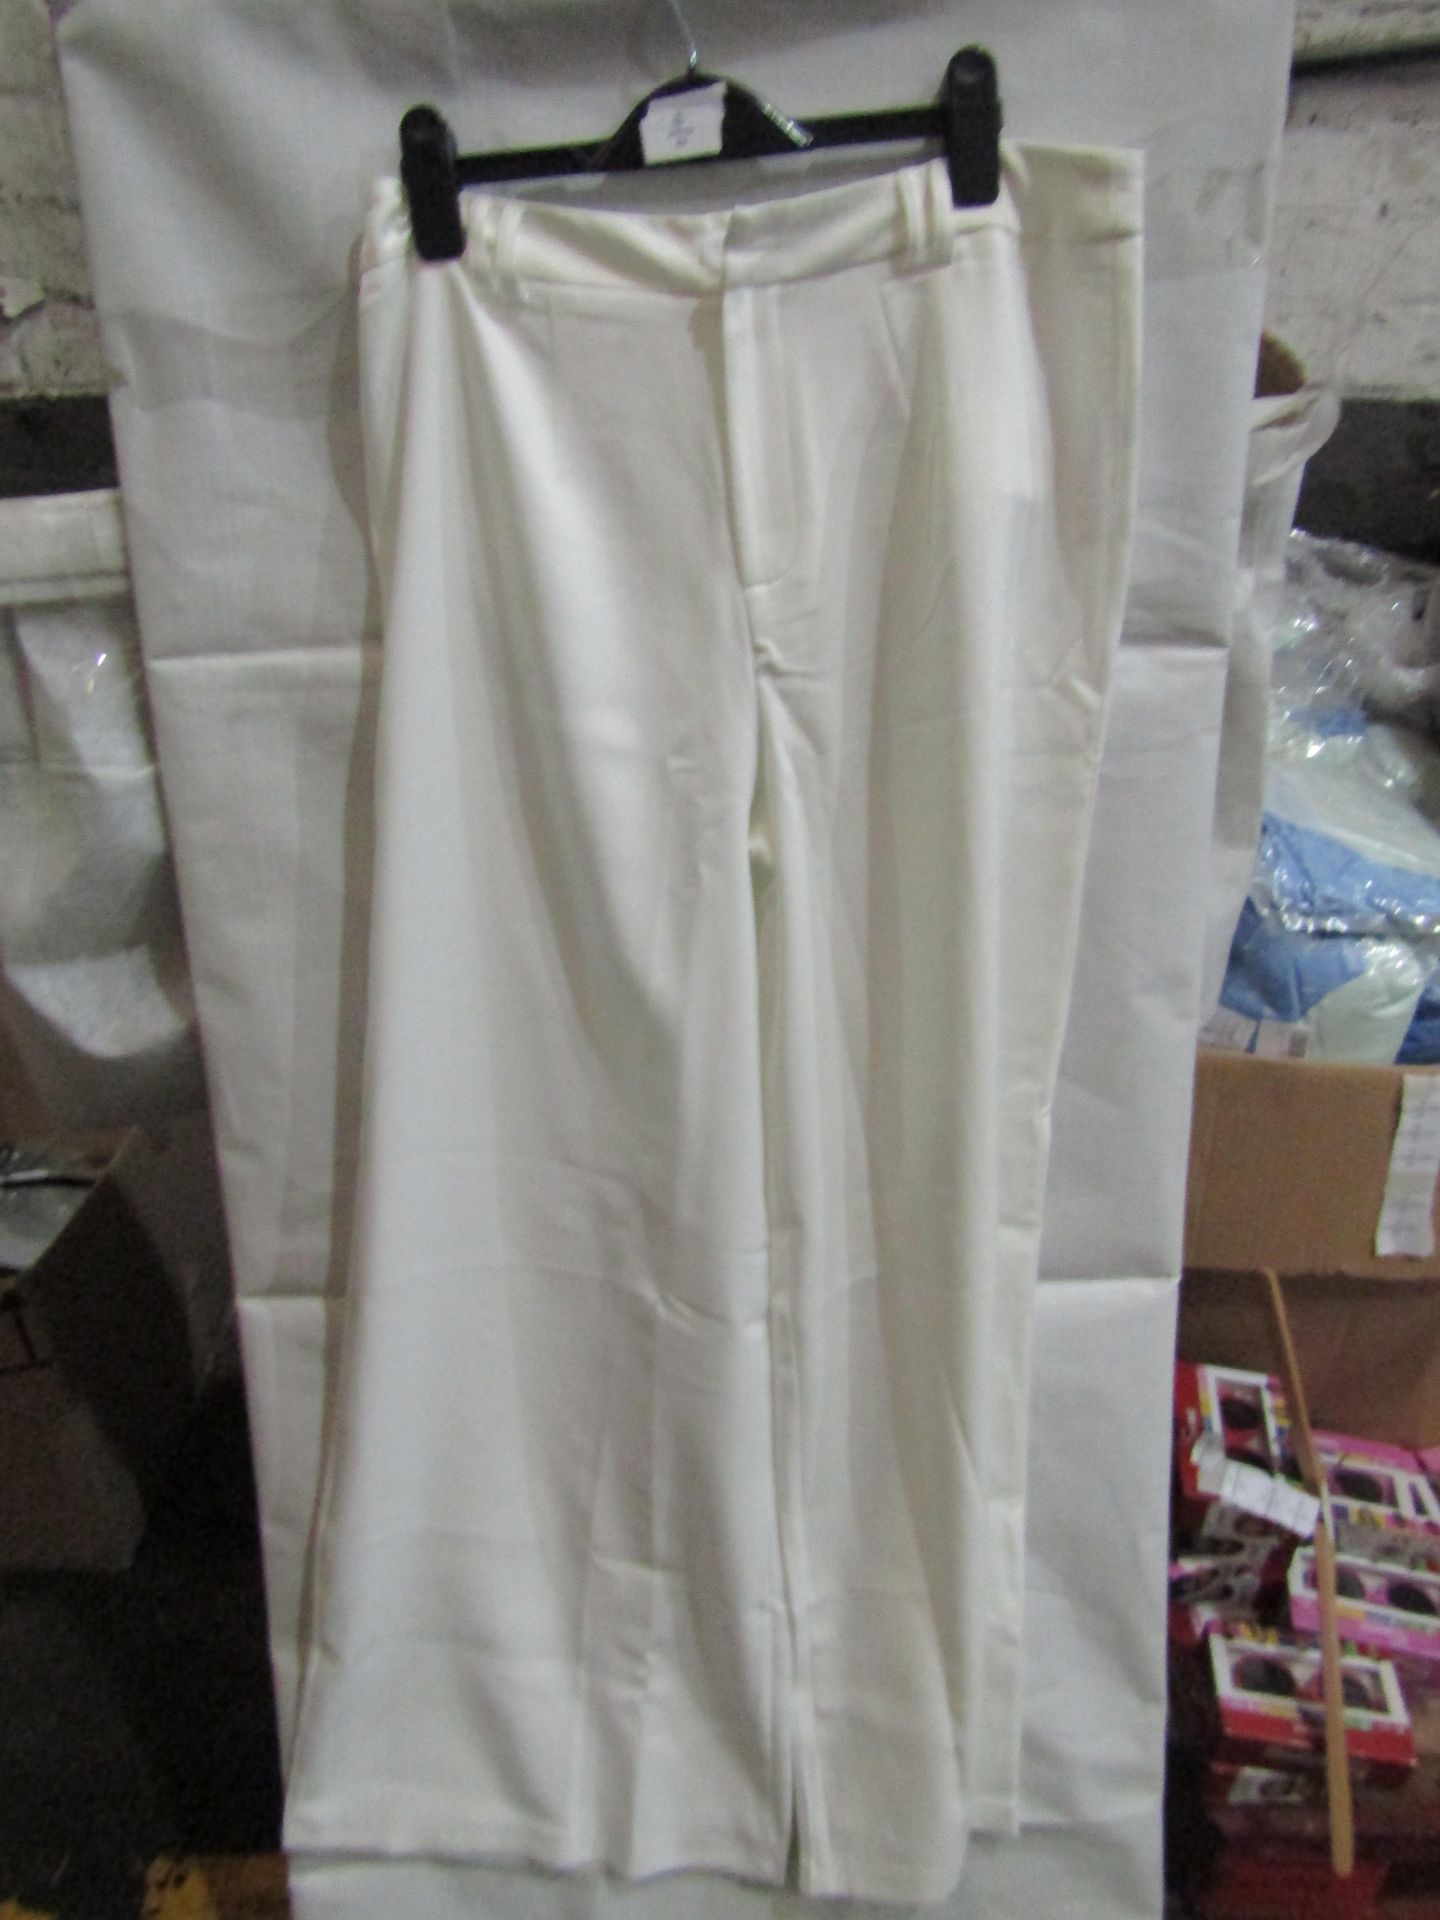 2x PrettyLittleThing White Woven Double Belt Loop Suit Trousers, Size: 12 - New & Packaged.